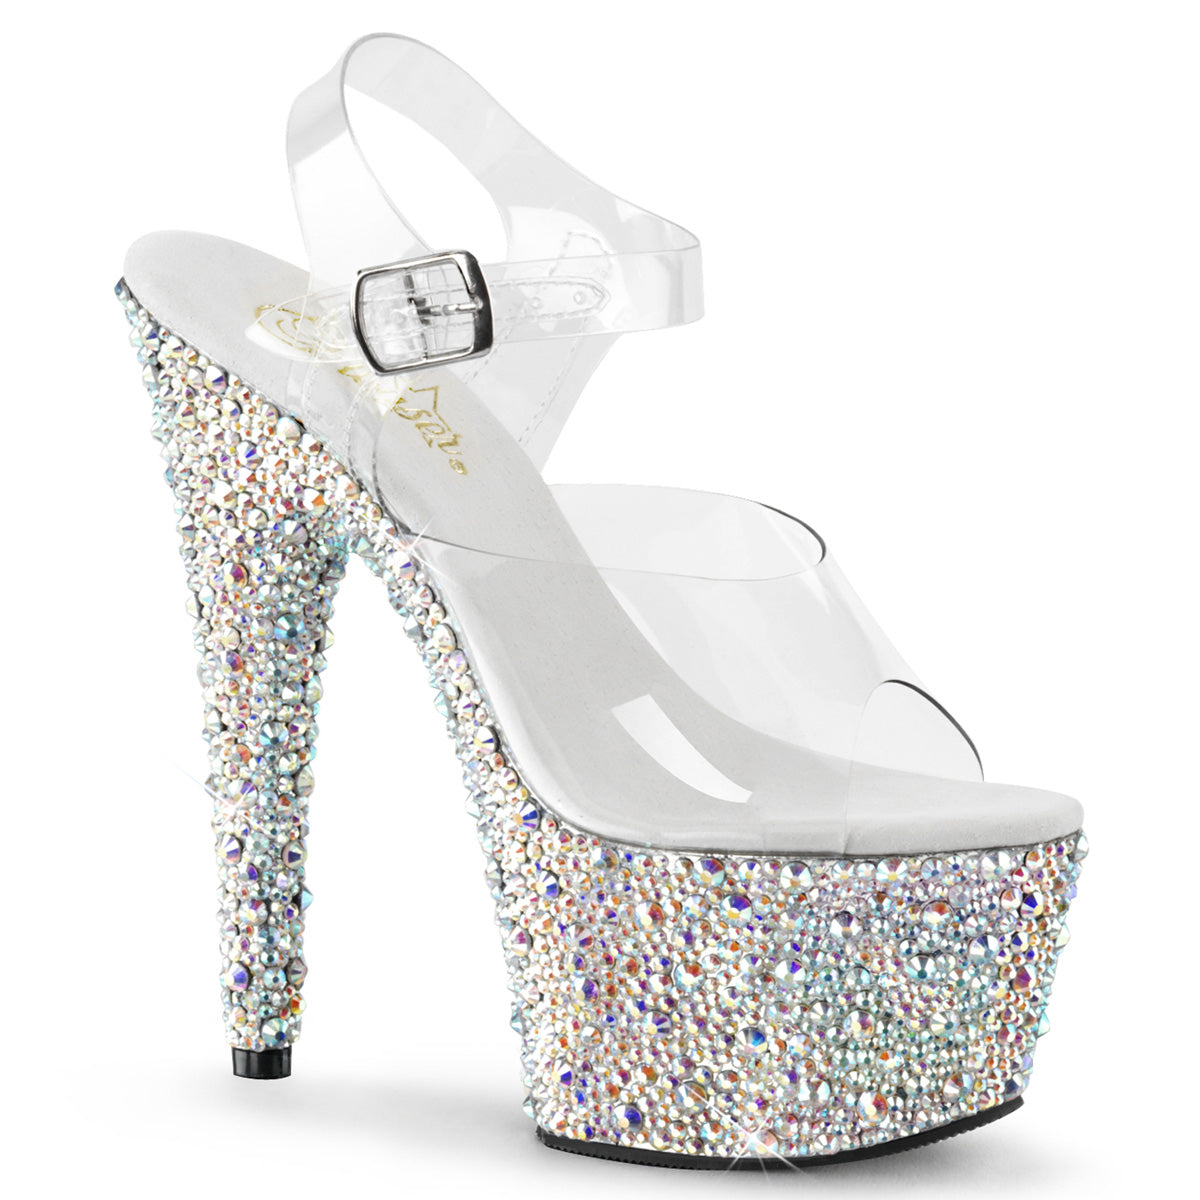 BEJEWELED-708MS Clear & Silver Ankle Peep Toe High Heel